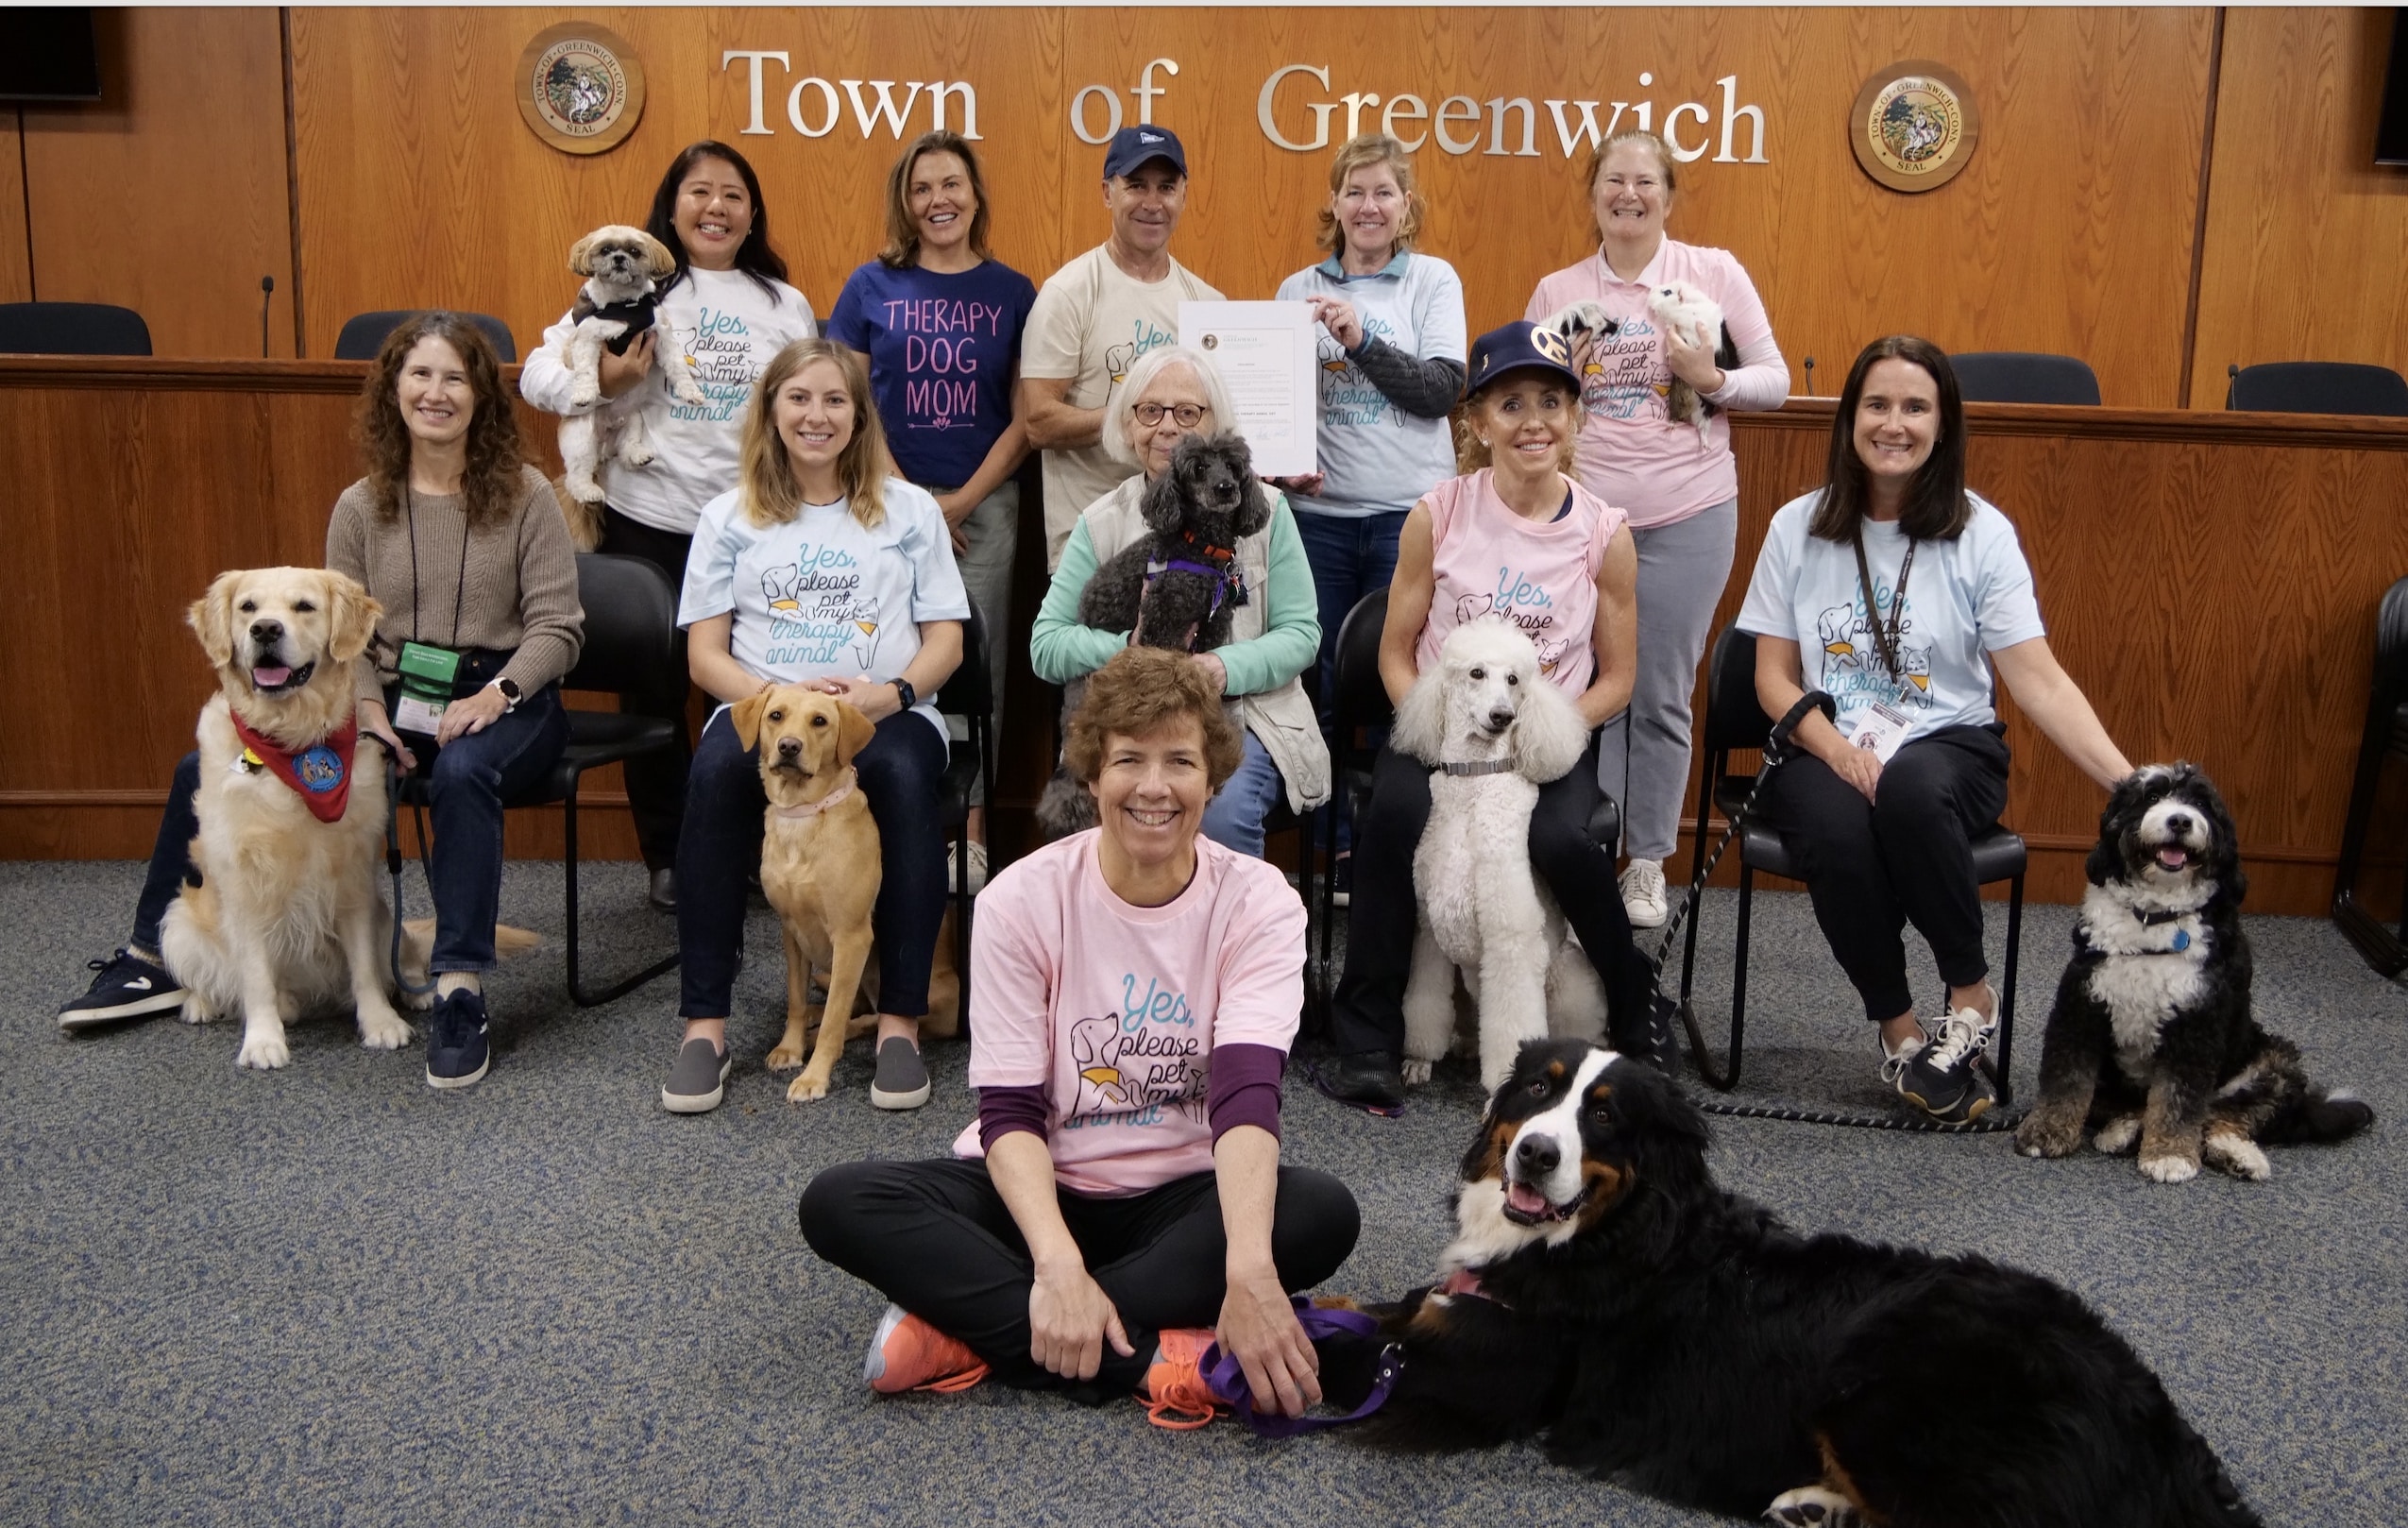 A group of Pet Partners handlers poses with their therapy dogs in Greenwich, CT.